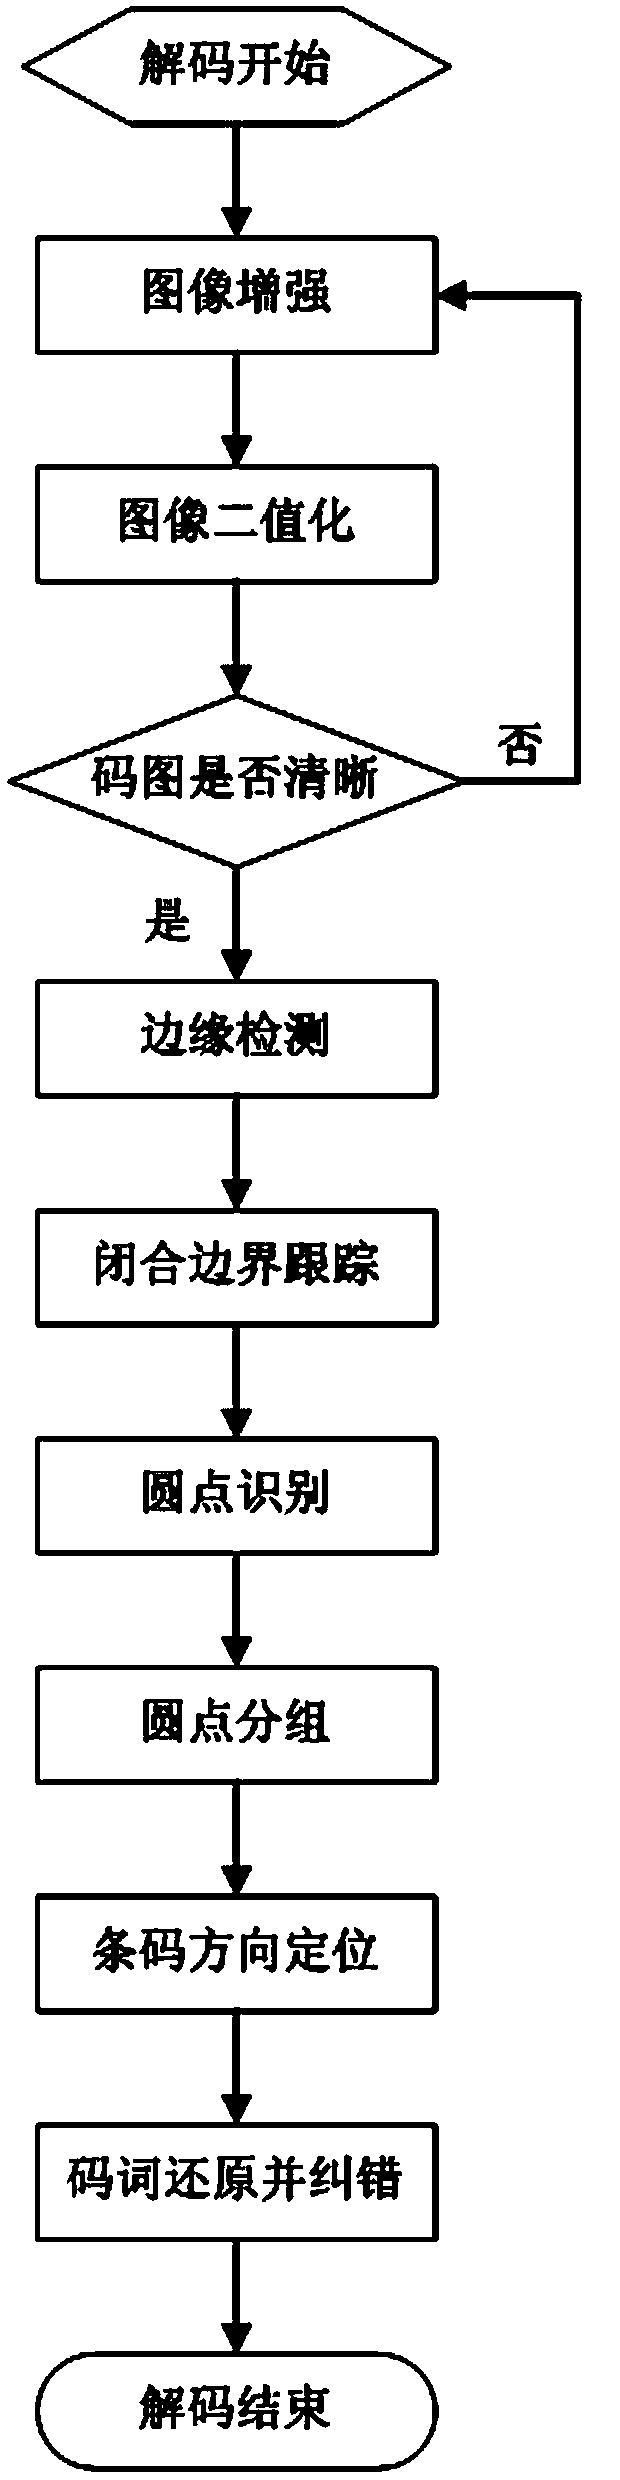 Decoding method for automatically repairing and identifying code pattern symbols of two-dimensional codes and apparatus